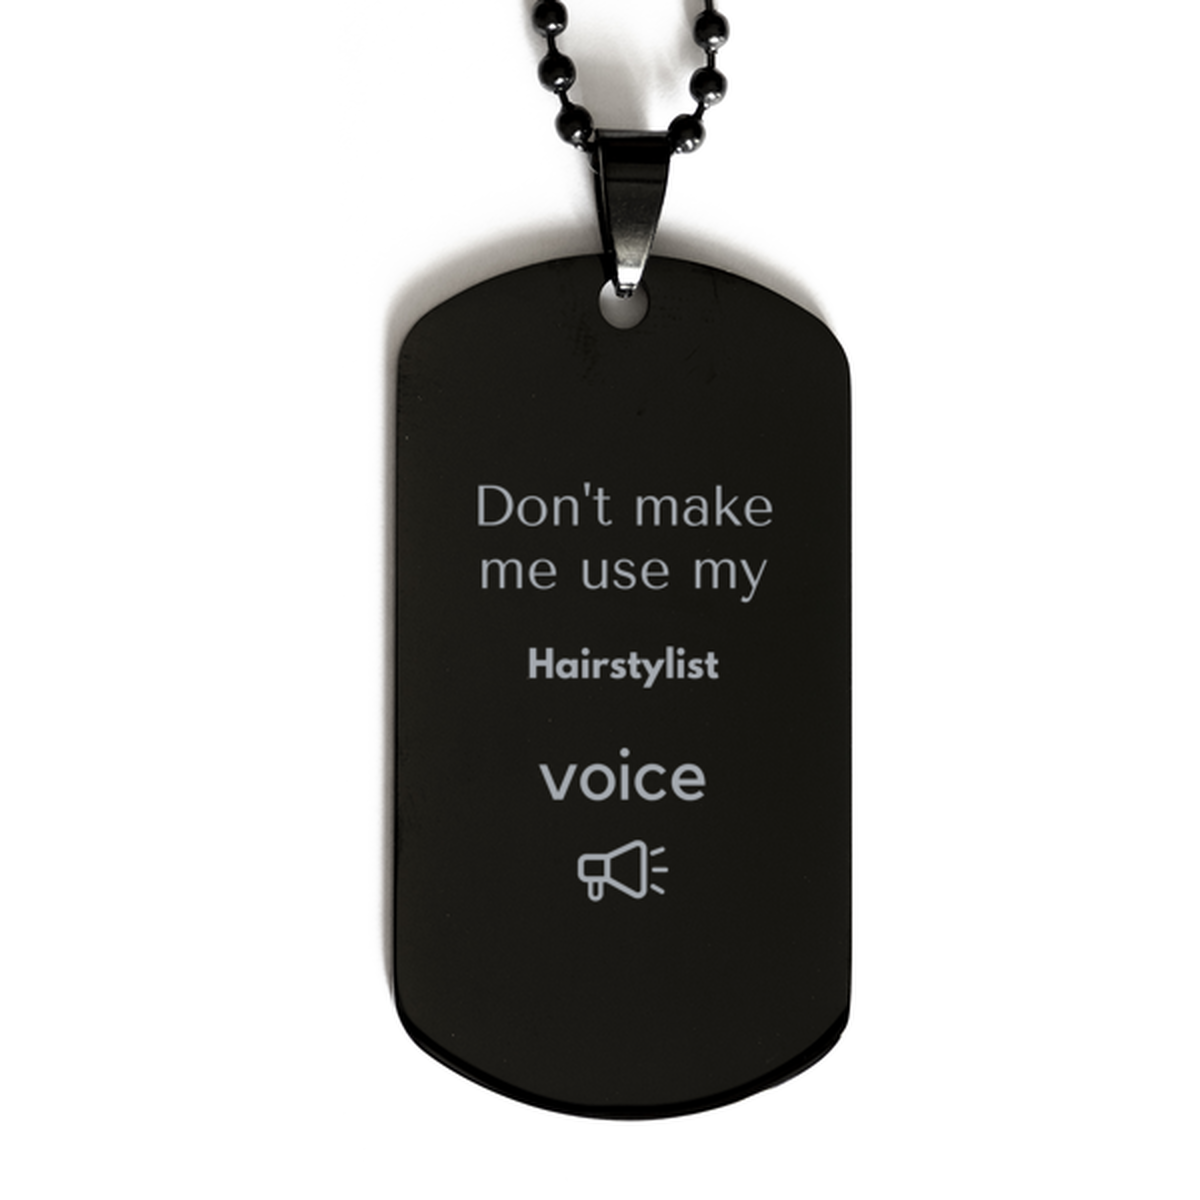 Don't make me use my Hairstylist voice, Sarcasm Hairstylist Gifts, Christmas Hairstylist Black Dog Tag Birthday Unique Gifts For Hairstylist Coworkers, Men, Women, Colleague, Friends